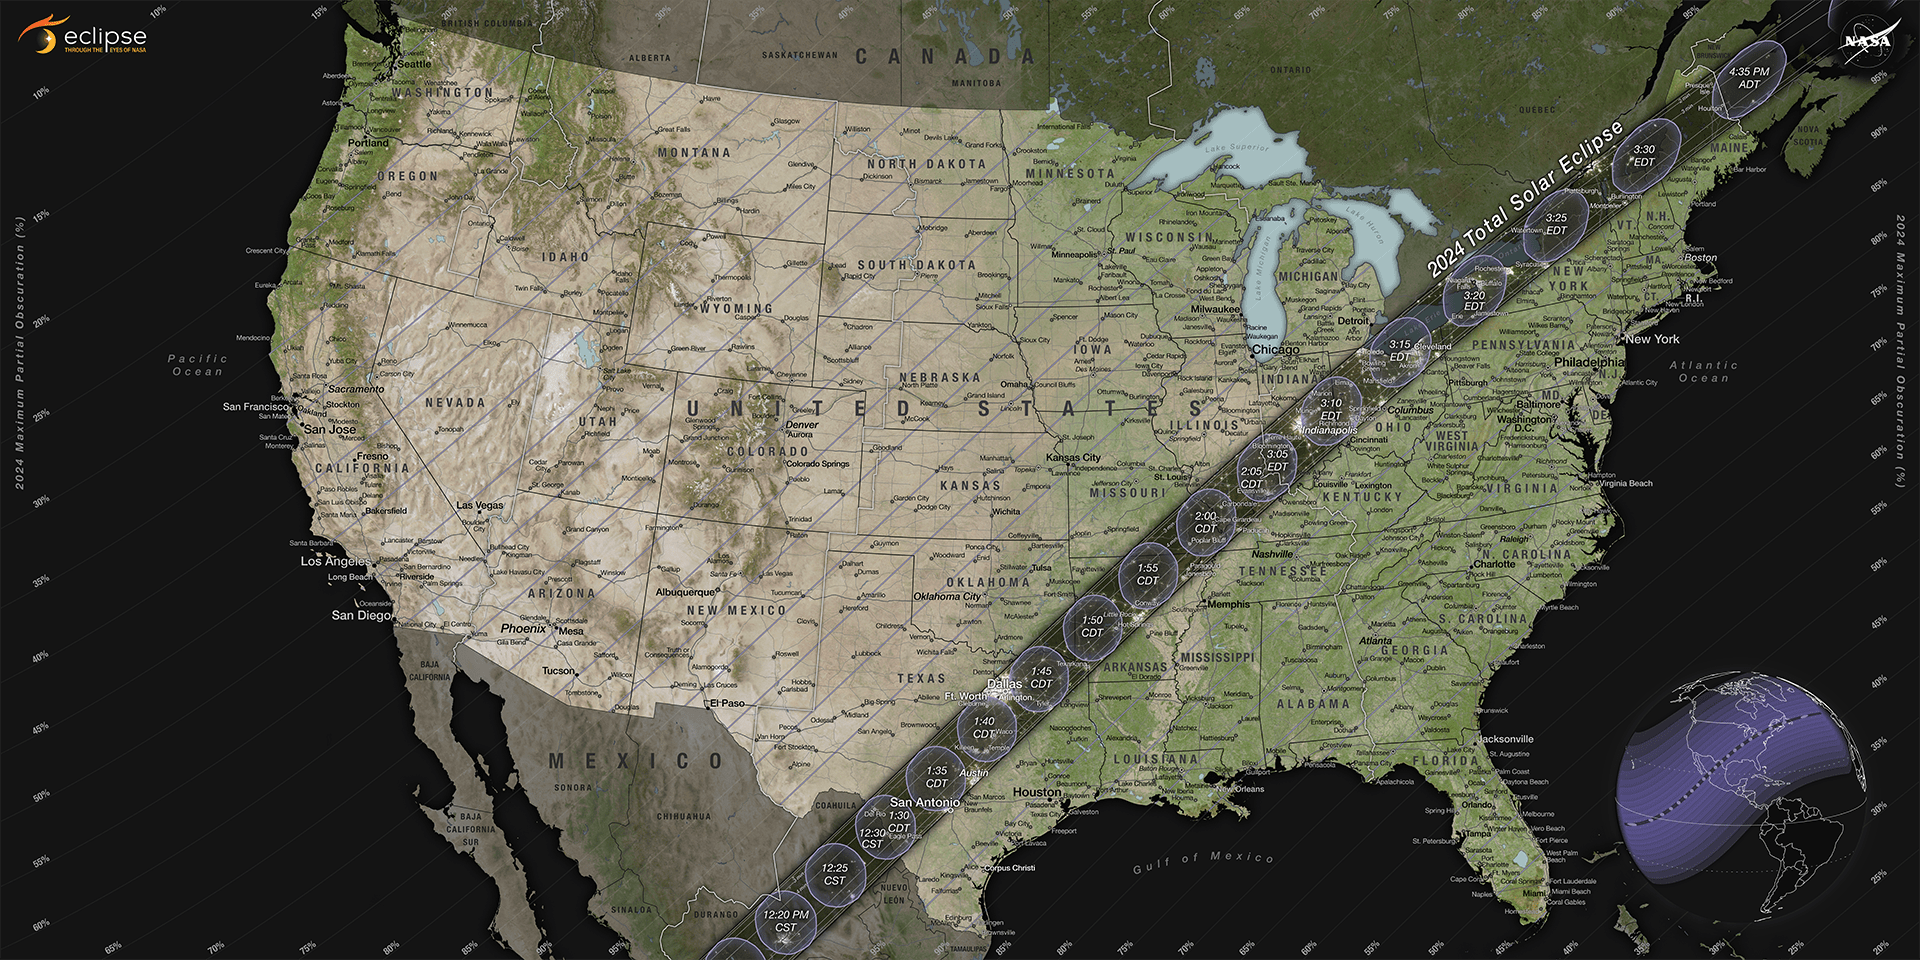 A map of the contiguous U.S. shows the path of the 2024 total solar eclipse stretching on a narrow band from Texas to Maine.